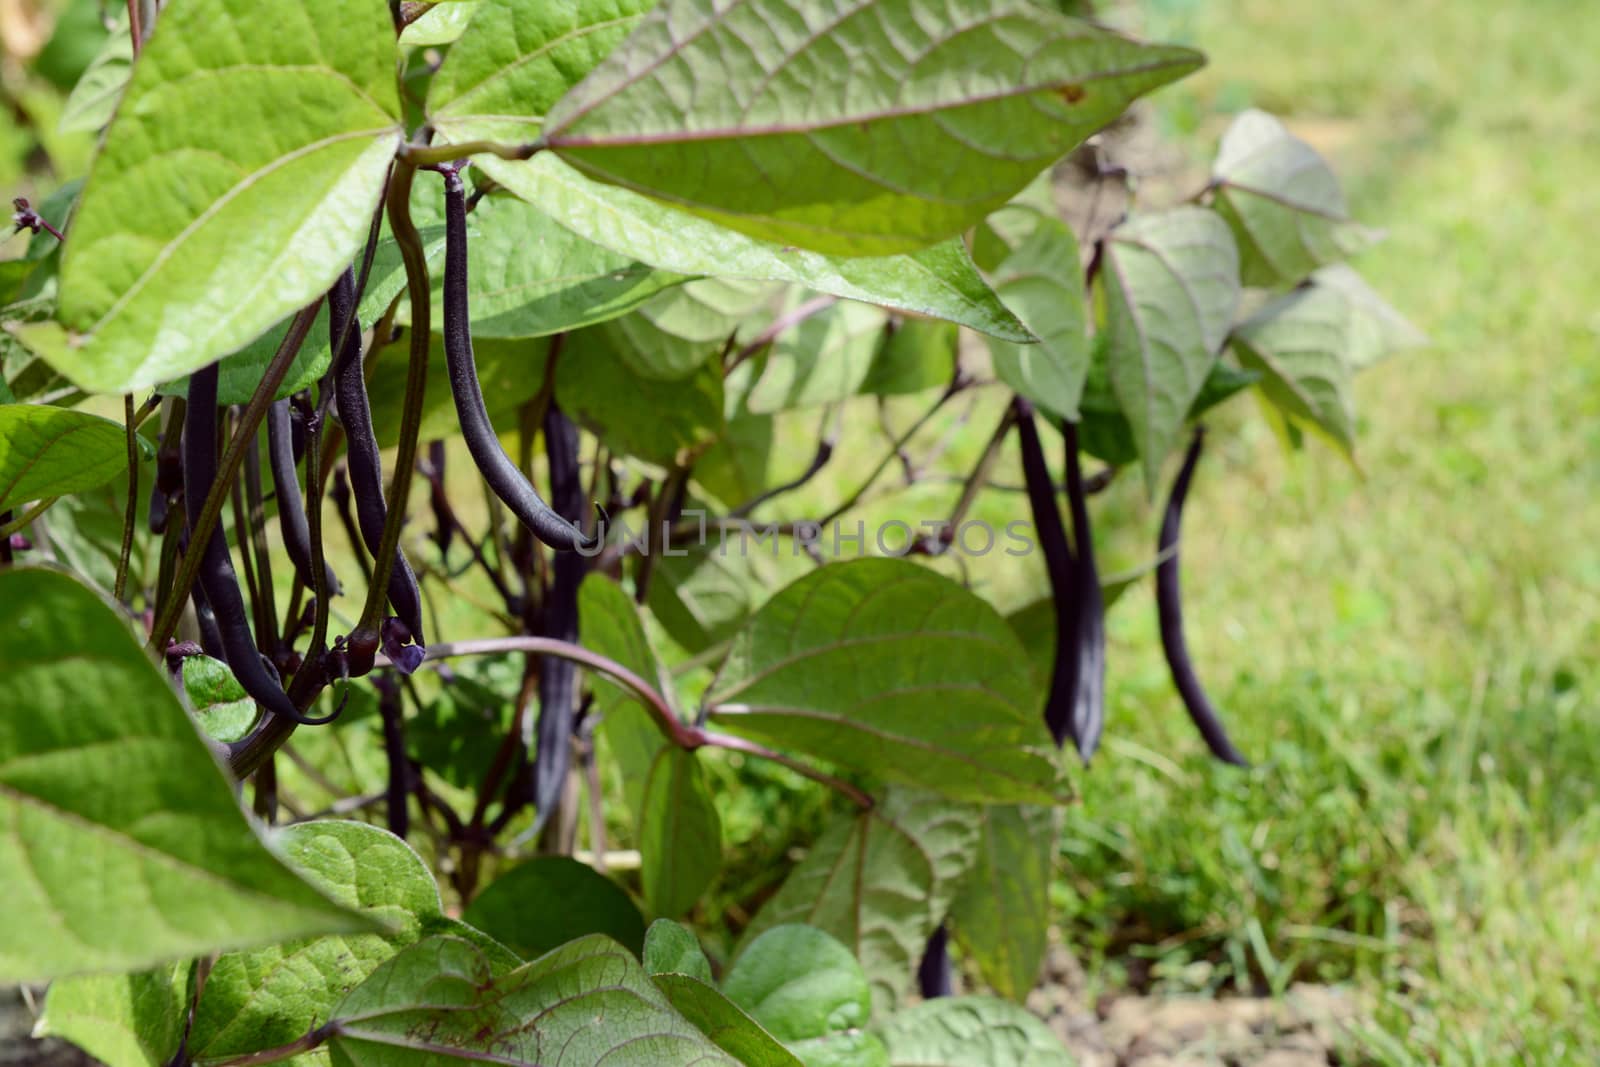 Dark purple French bean pod in selective focus among lush green leaves and hanging beans